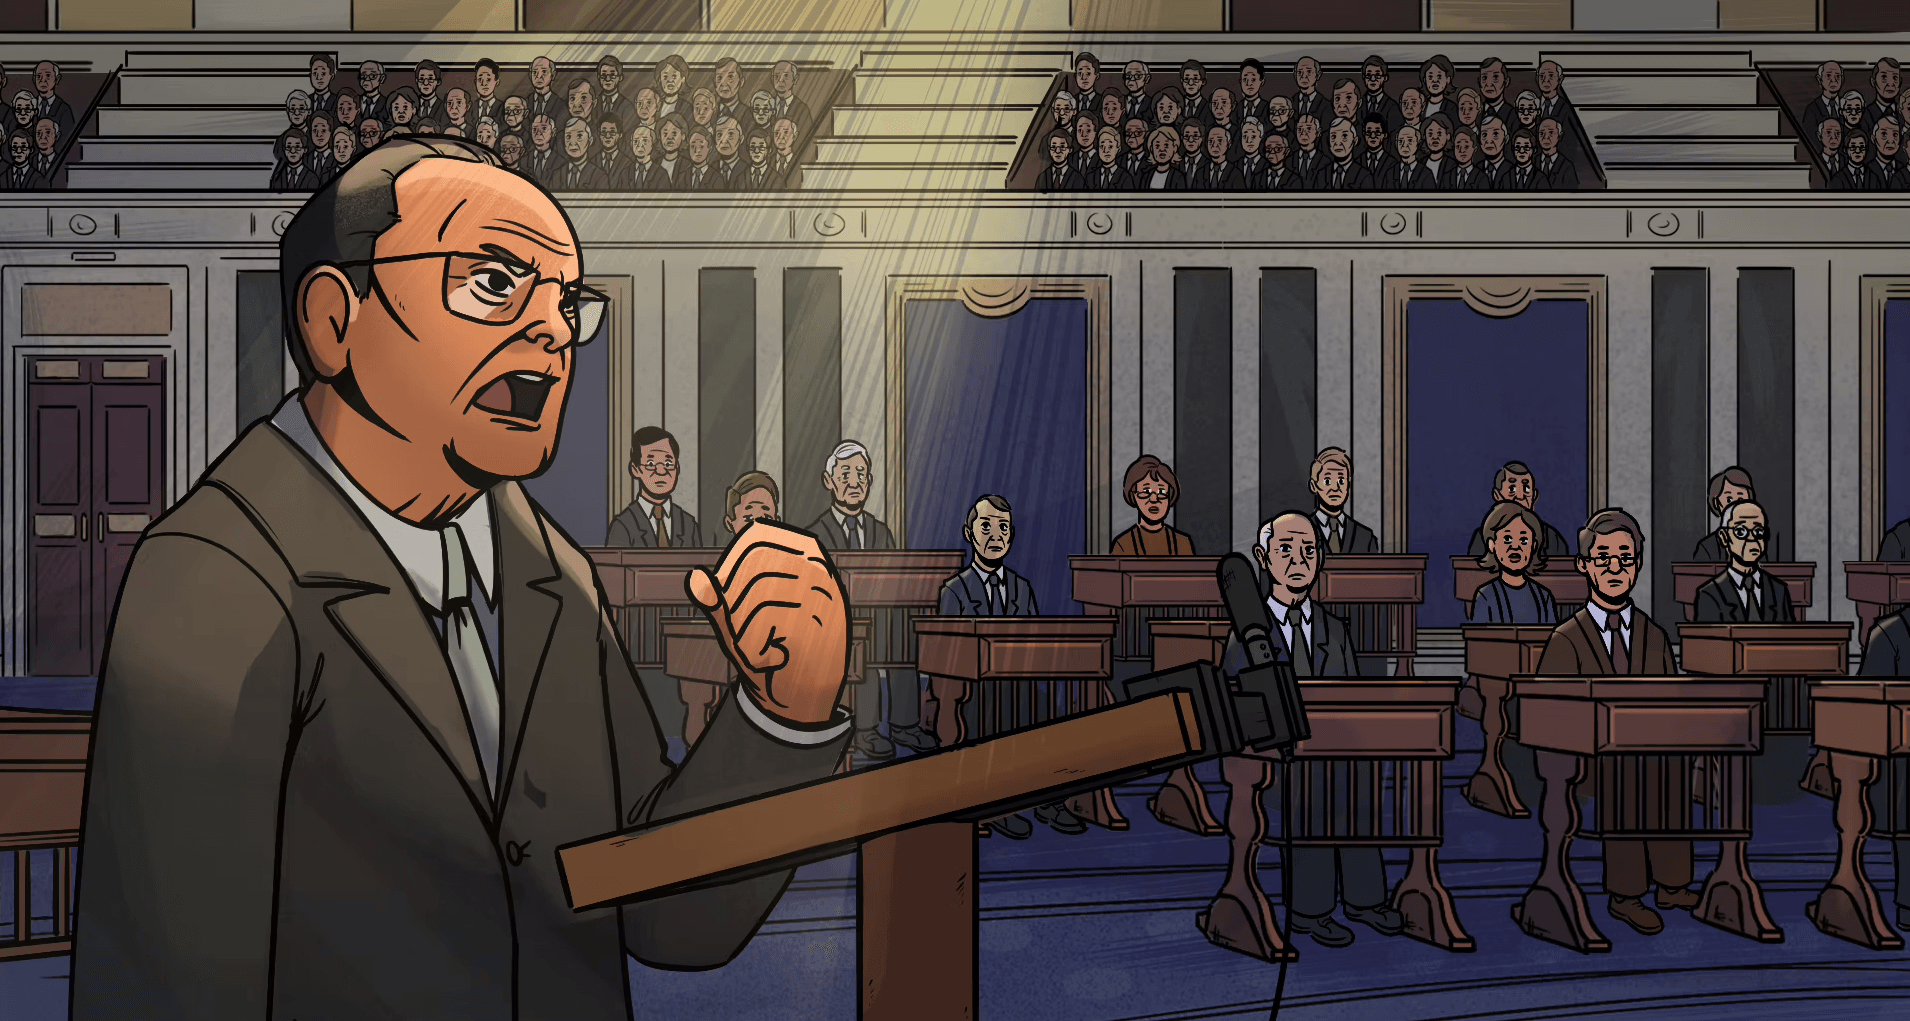 A cartoon of a man in a suit speaking to a crowd